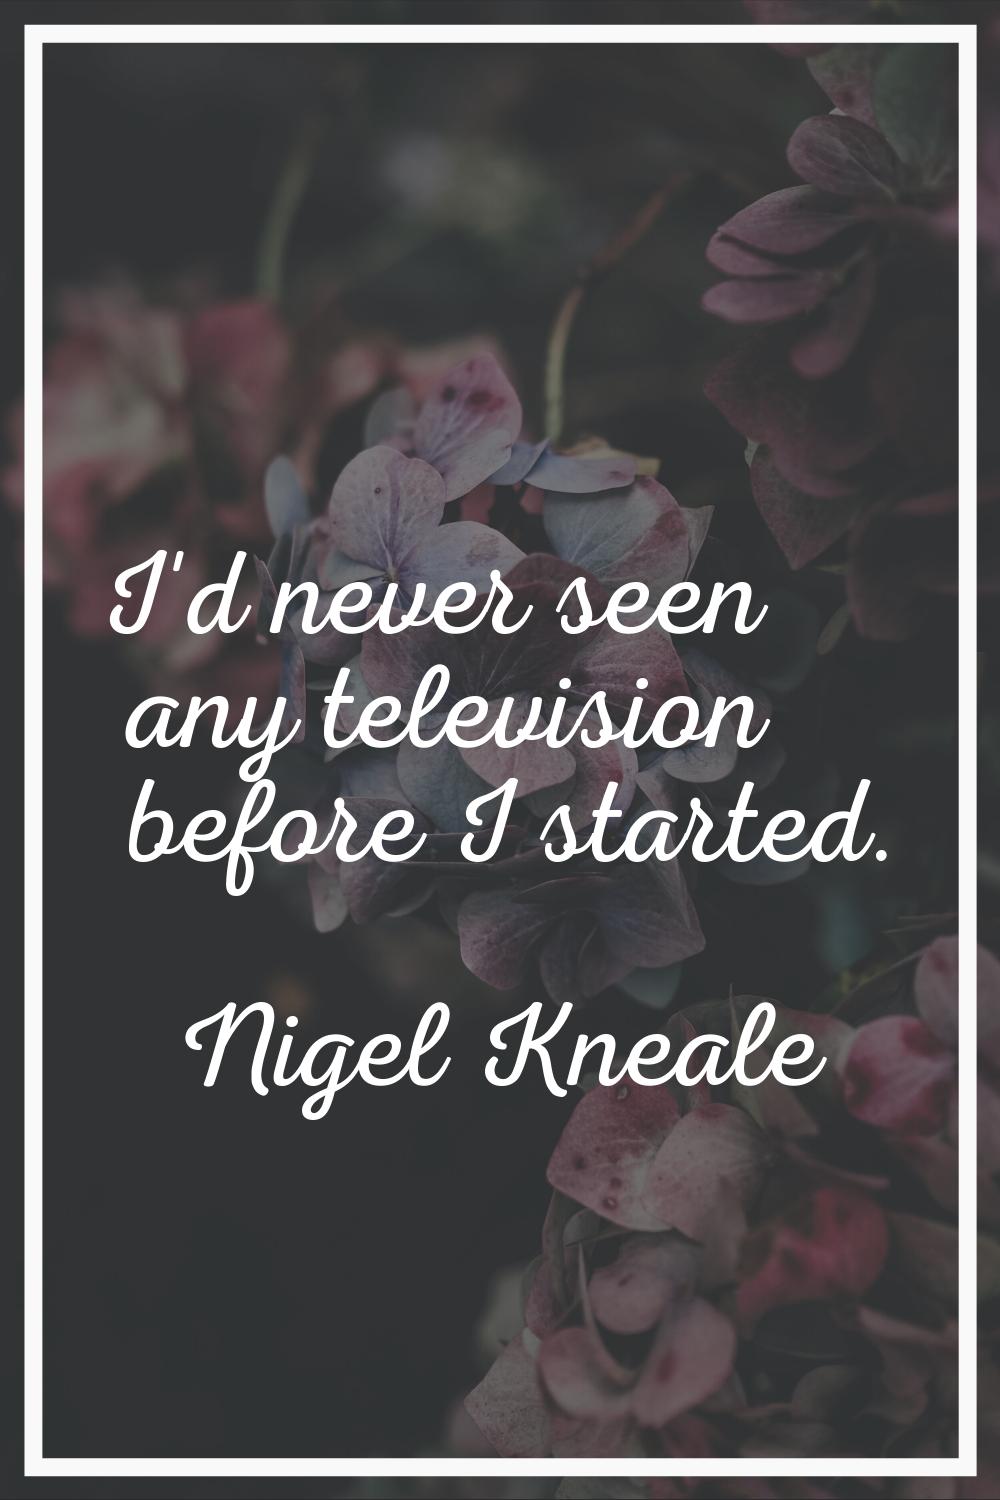 I'd never seen any television before I started.